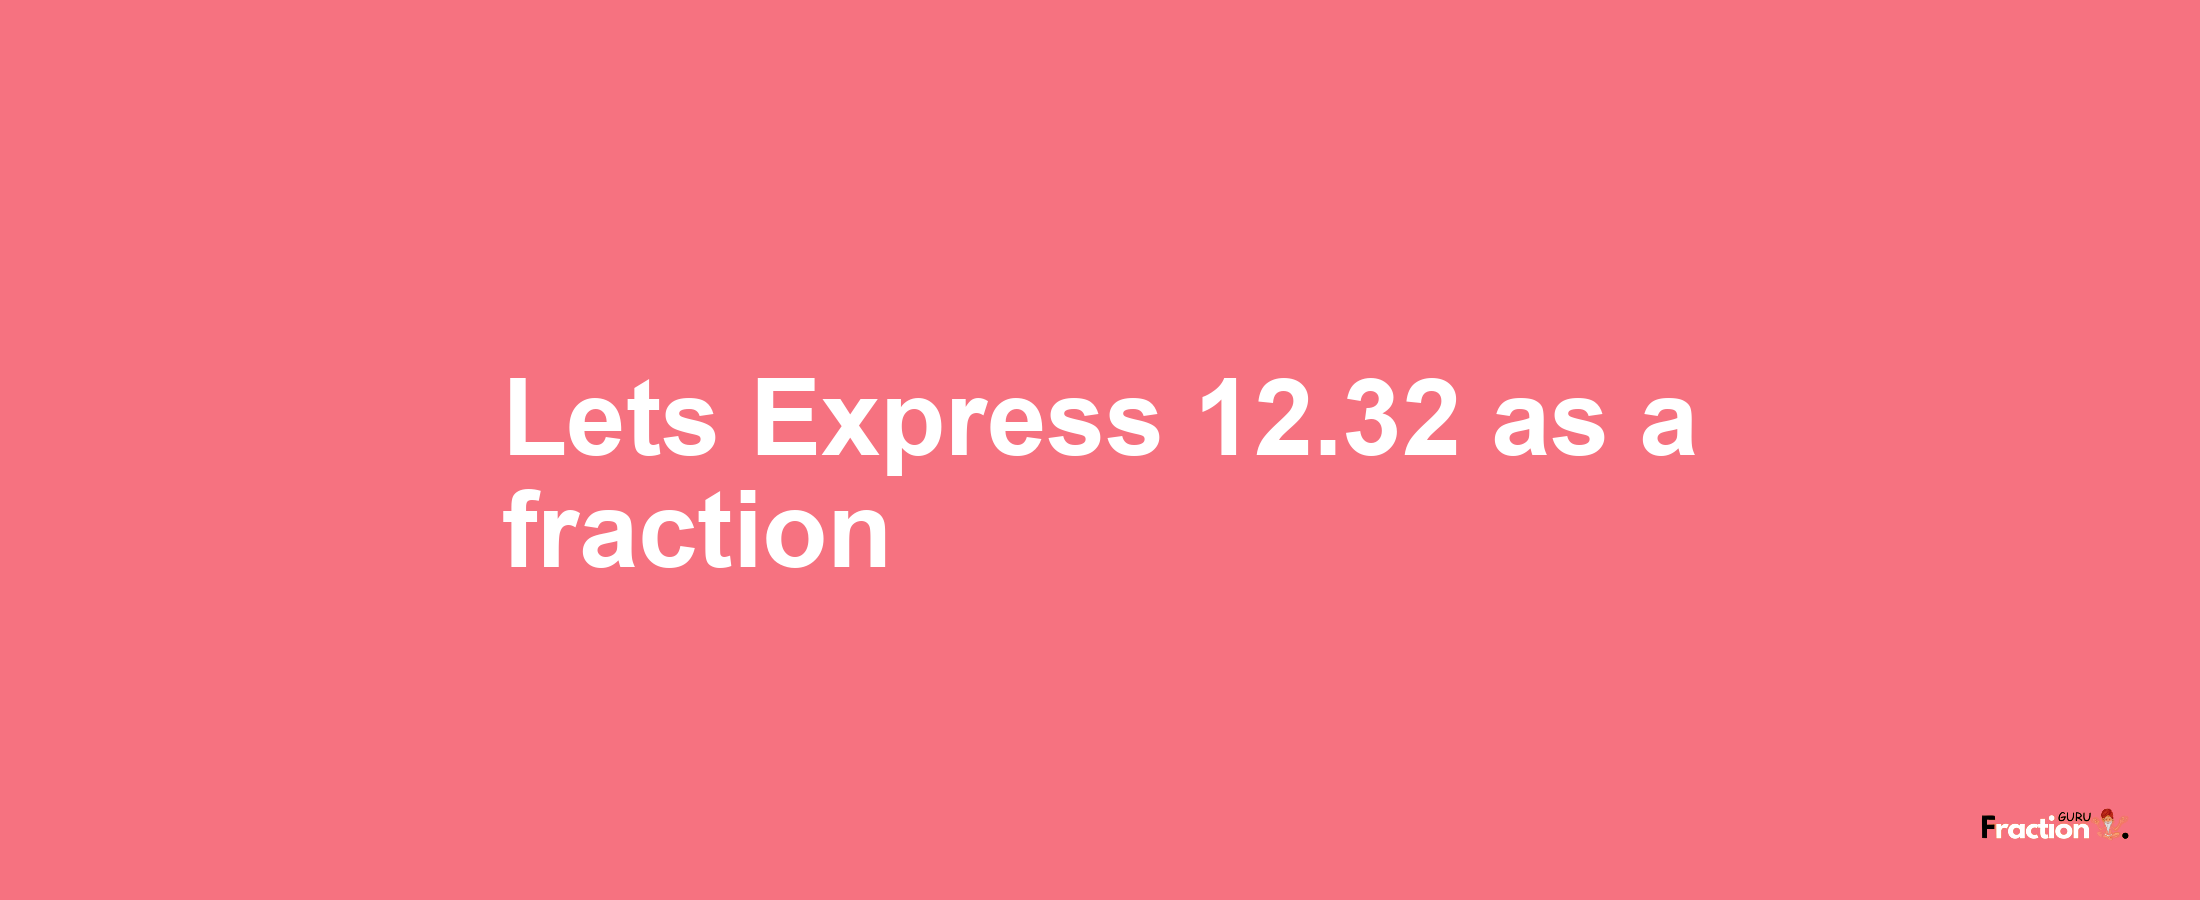 Lets Express 12.32 as afraction